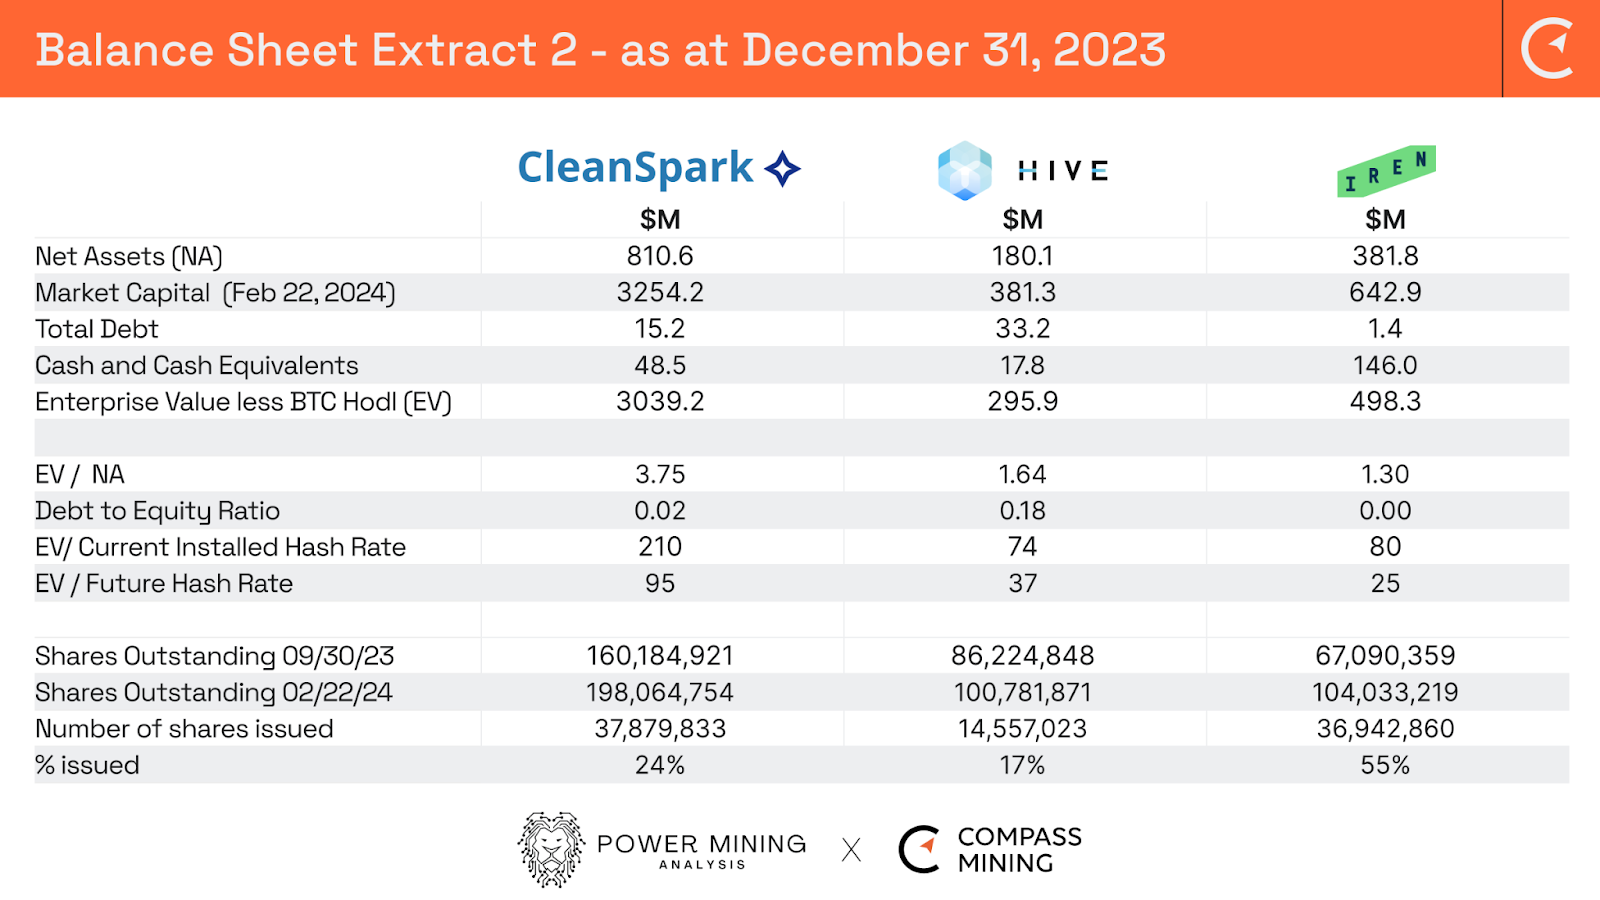 Quarterly Earnings Review CLSK HIVE and IREN